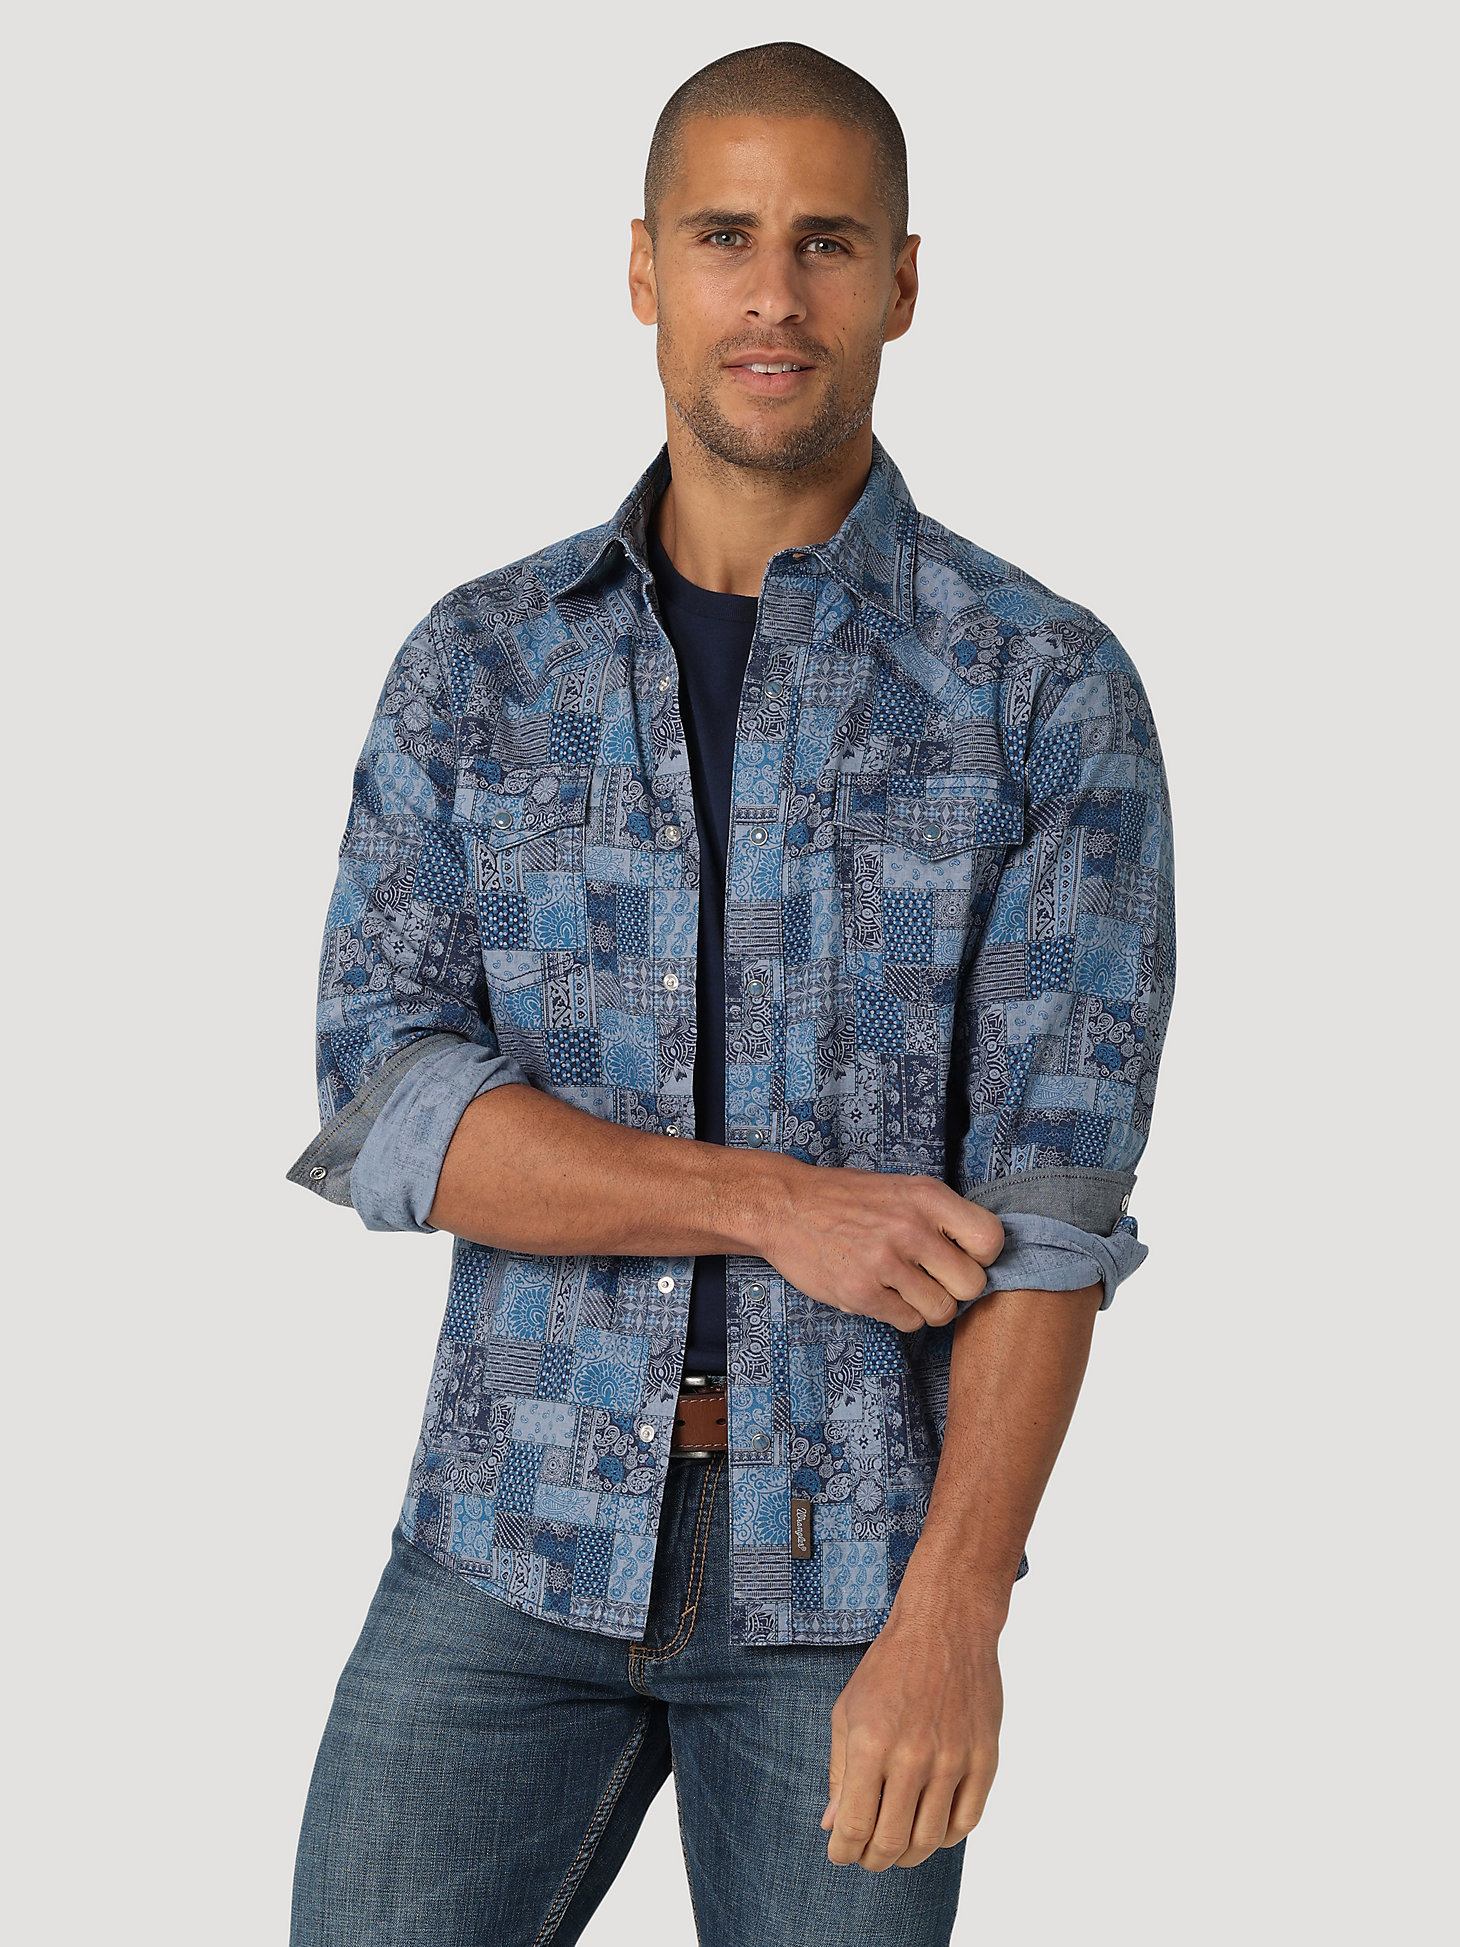 Wrangler Retro® Premium Patchwork Western Snap Shirt in Blue Patches main view